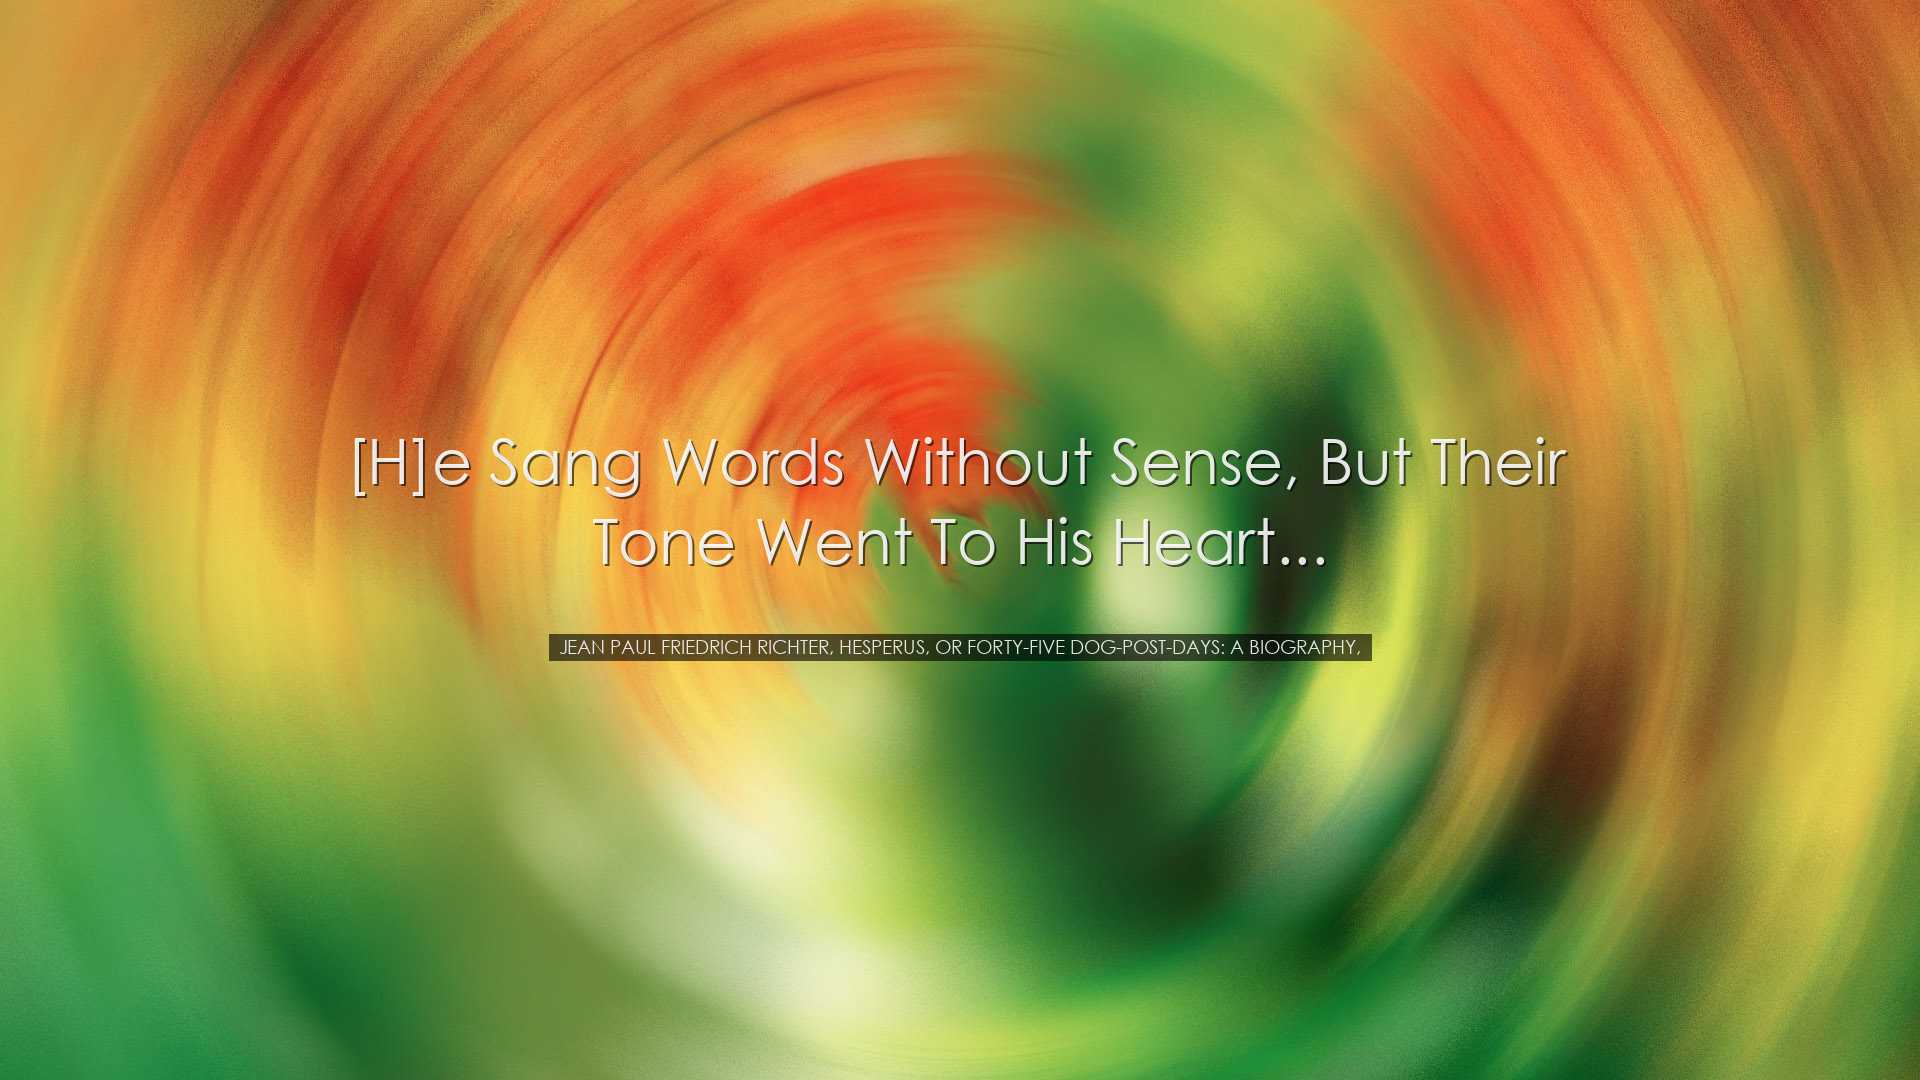 [H]e sang words without sense, but their tone went to his heart...